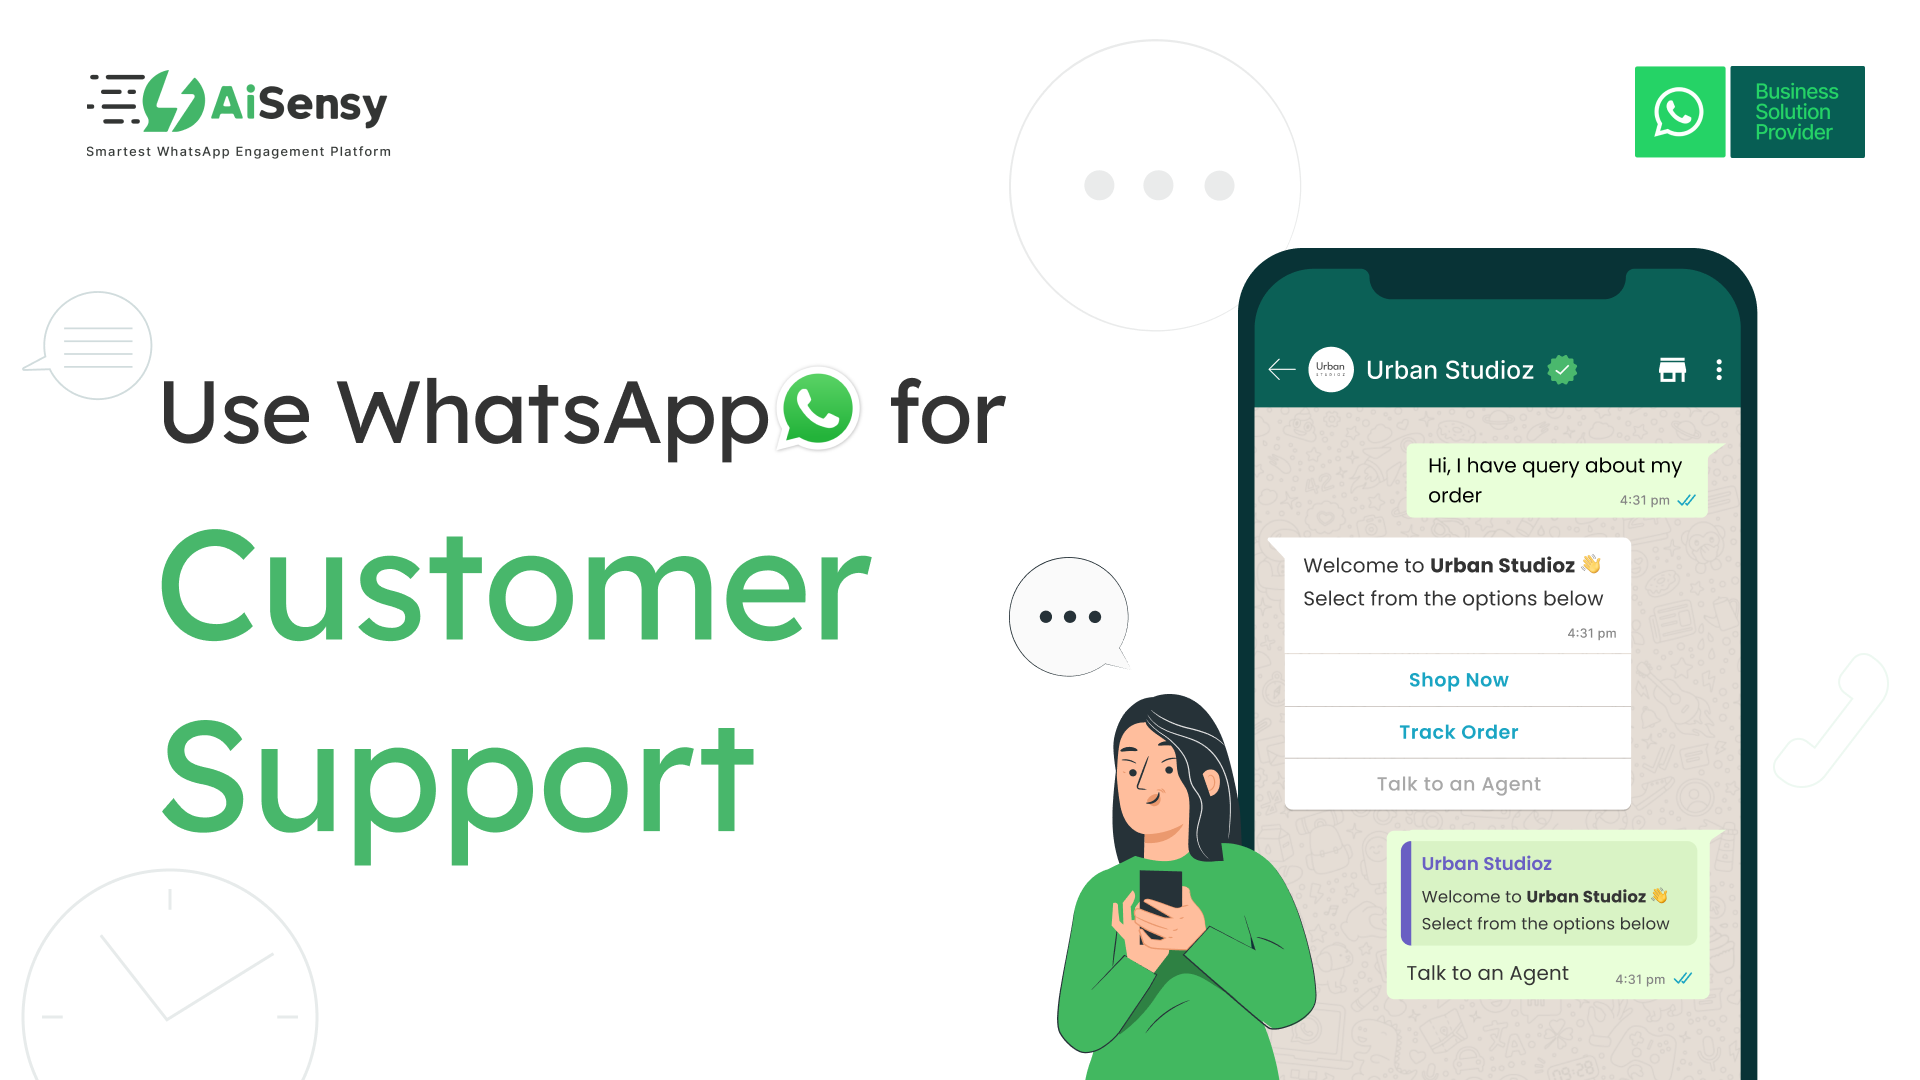 Tips to use WhatsApp for Customer Support